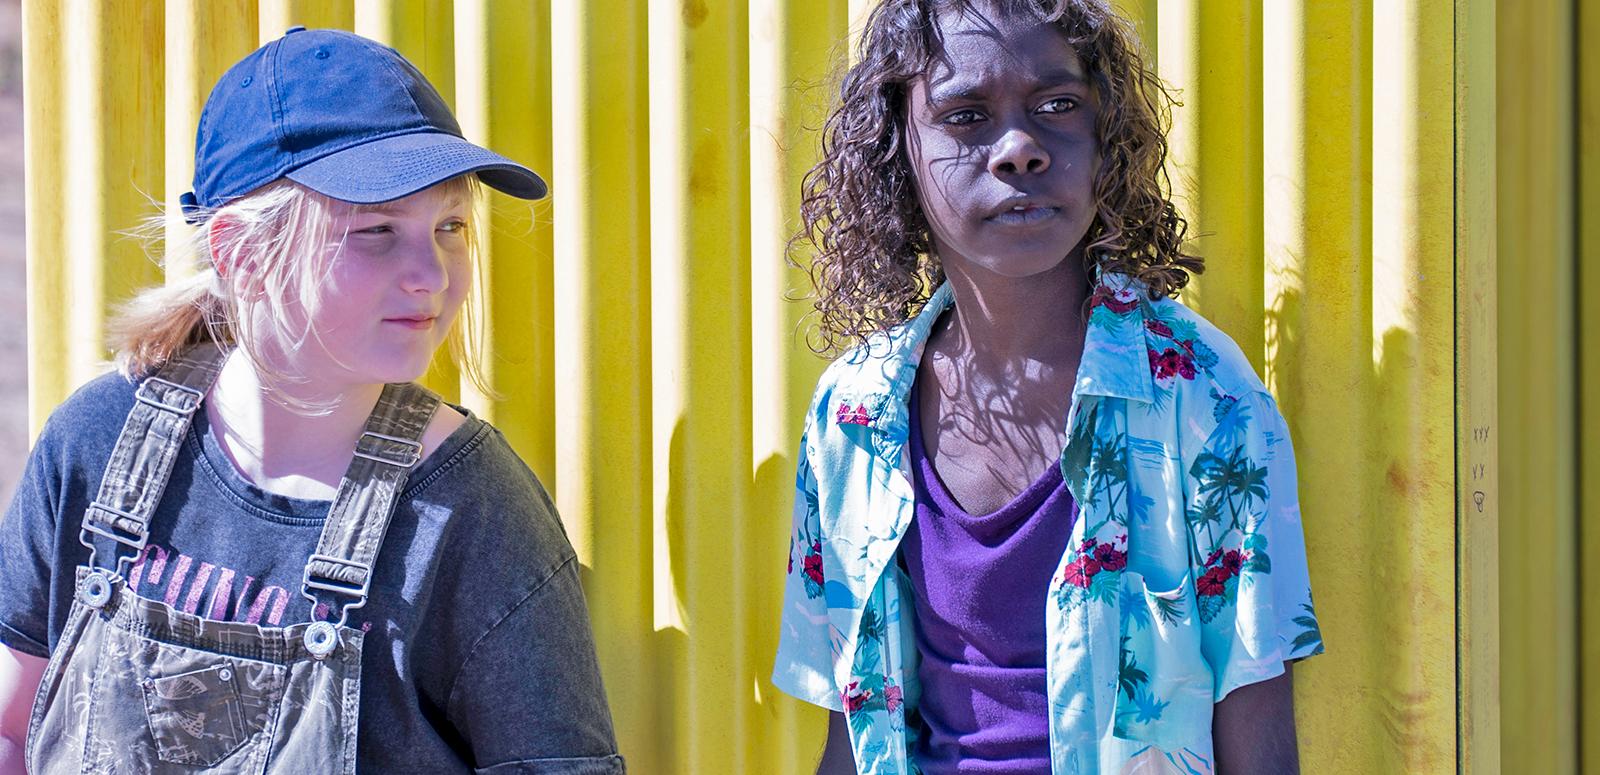 Two kids standing side by side against a yellow corrugated iron fence. One is white girl with straight blond hair in a ponytail, wearing denim overalls and a cap, and the other is a First Nations boy with curly dark hair wearing a purple singlet and blue Hawaiian shirt.